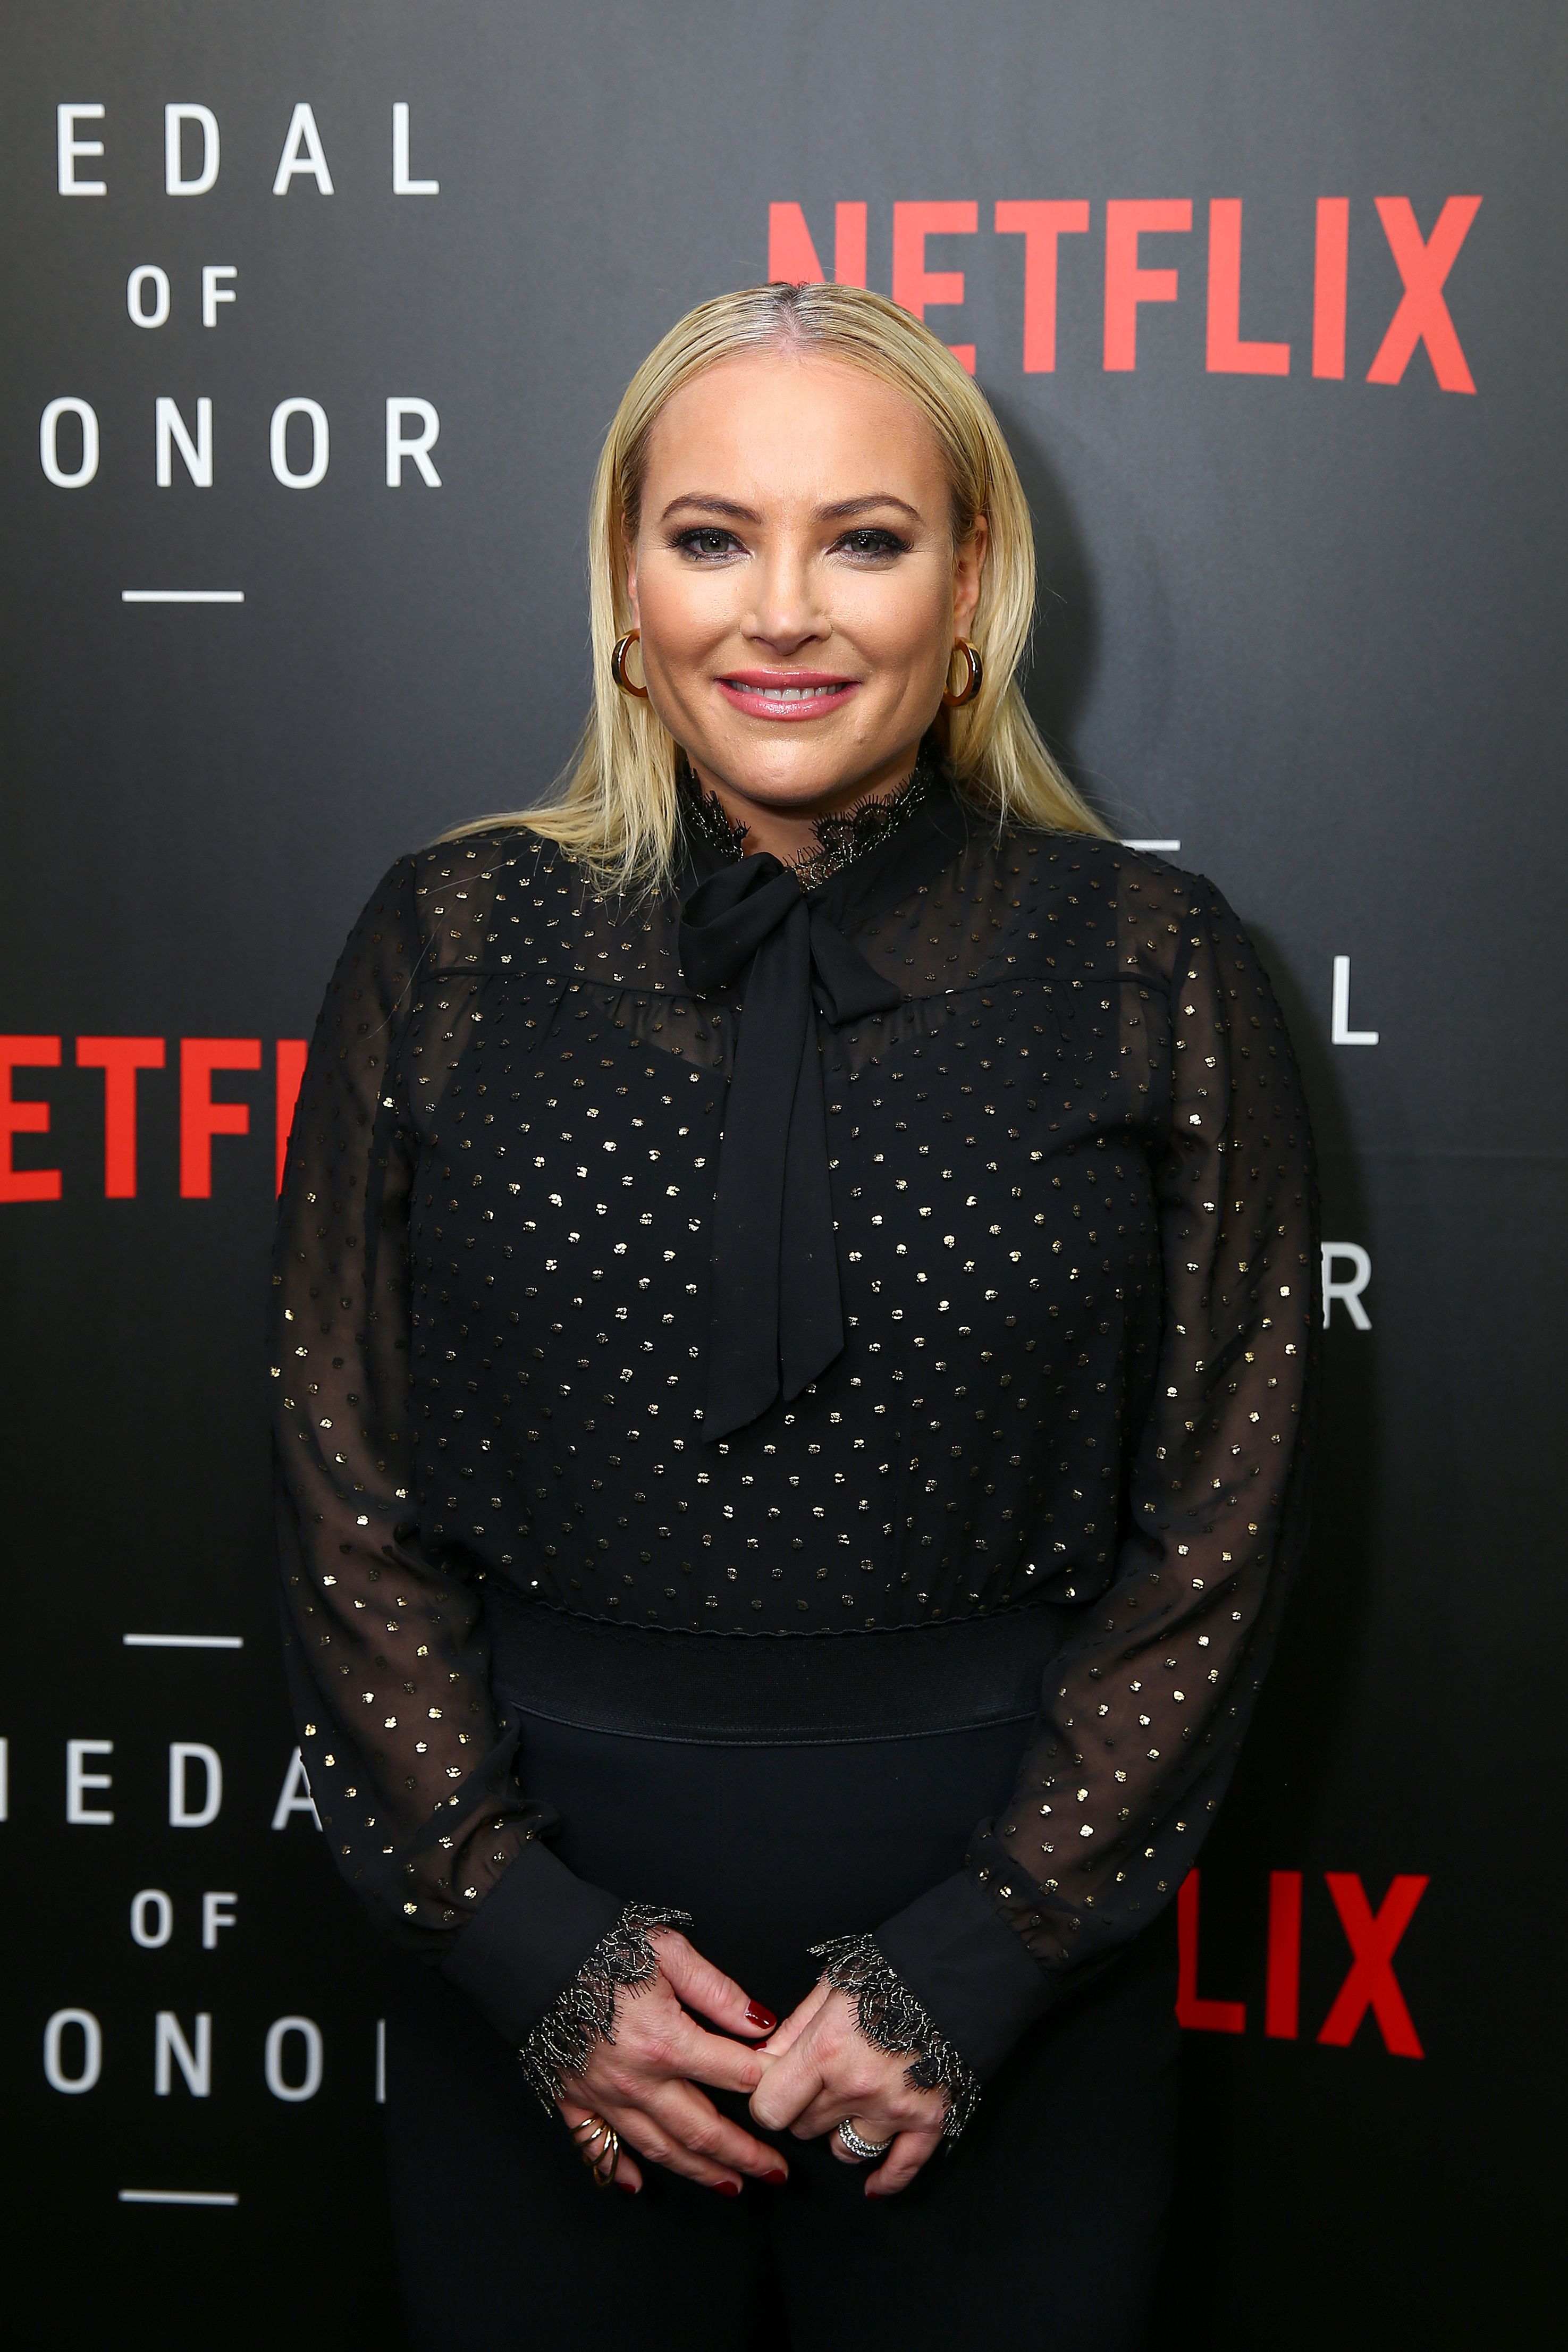 Meghan McCain at the Netflix 'Medal of Honor' screening and panel discussion at the US Navy Memorial Burke Theater on November 13, 2018 in Washington, DC. | Photo: Getty Images